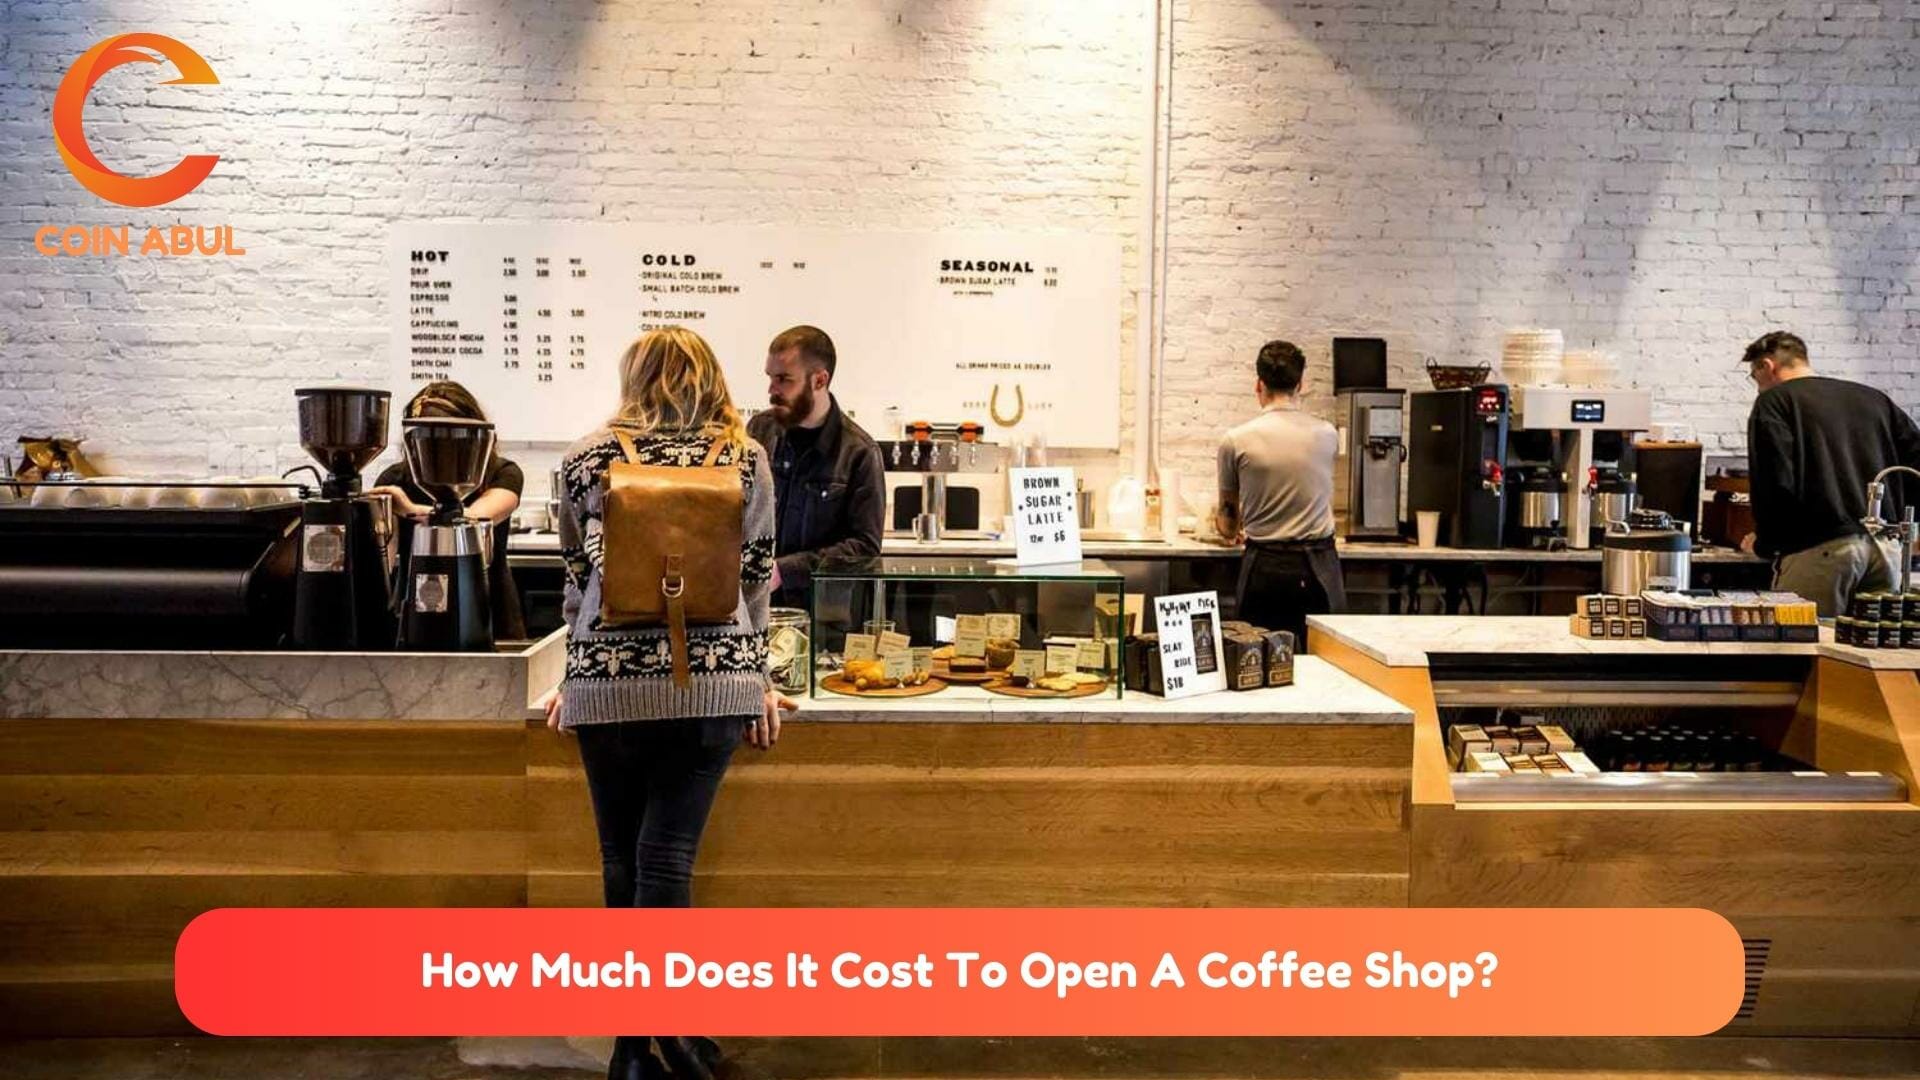 How Much Does It Cost To Open A Coffee Shop